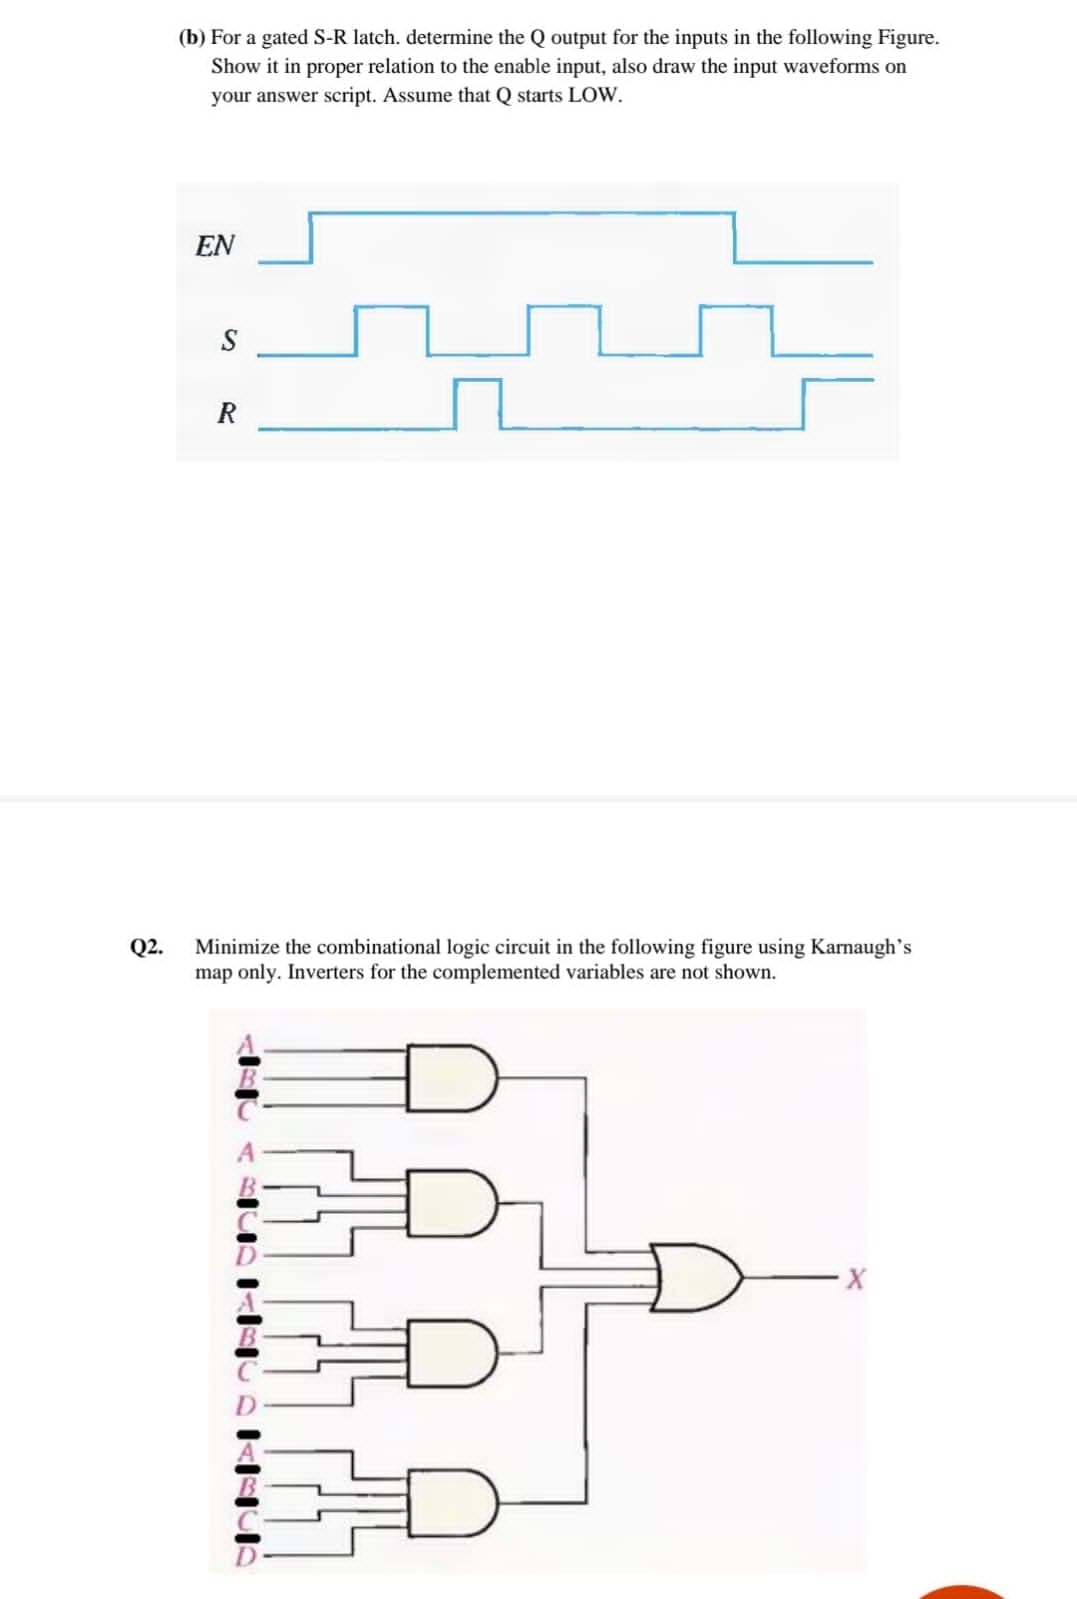 (b) For a gated S-R latch. determine the Q output for the inputs in the following Figure.
Show it in proper relation to the enable input, also draw the input waveforms on
your answer script. Assume that Q starts LOW.
EN
S
R
Minimize the combinational logic circuit in the following figure using Karnaugh's
map only. Inverters for the complemented variables are not shown.
Q2.
